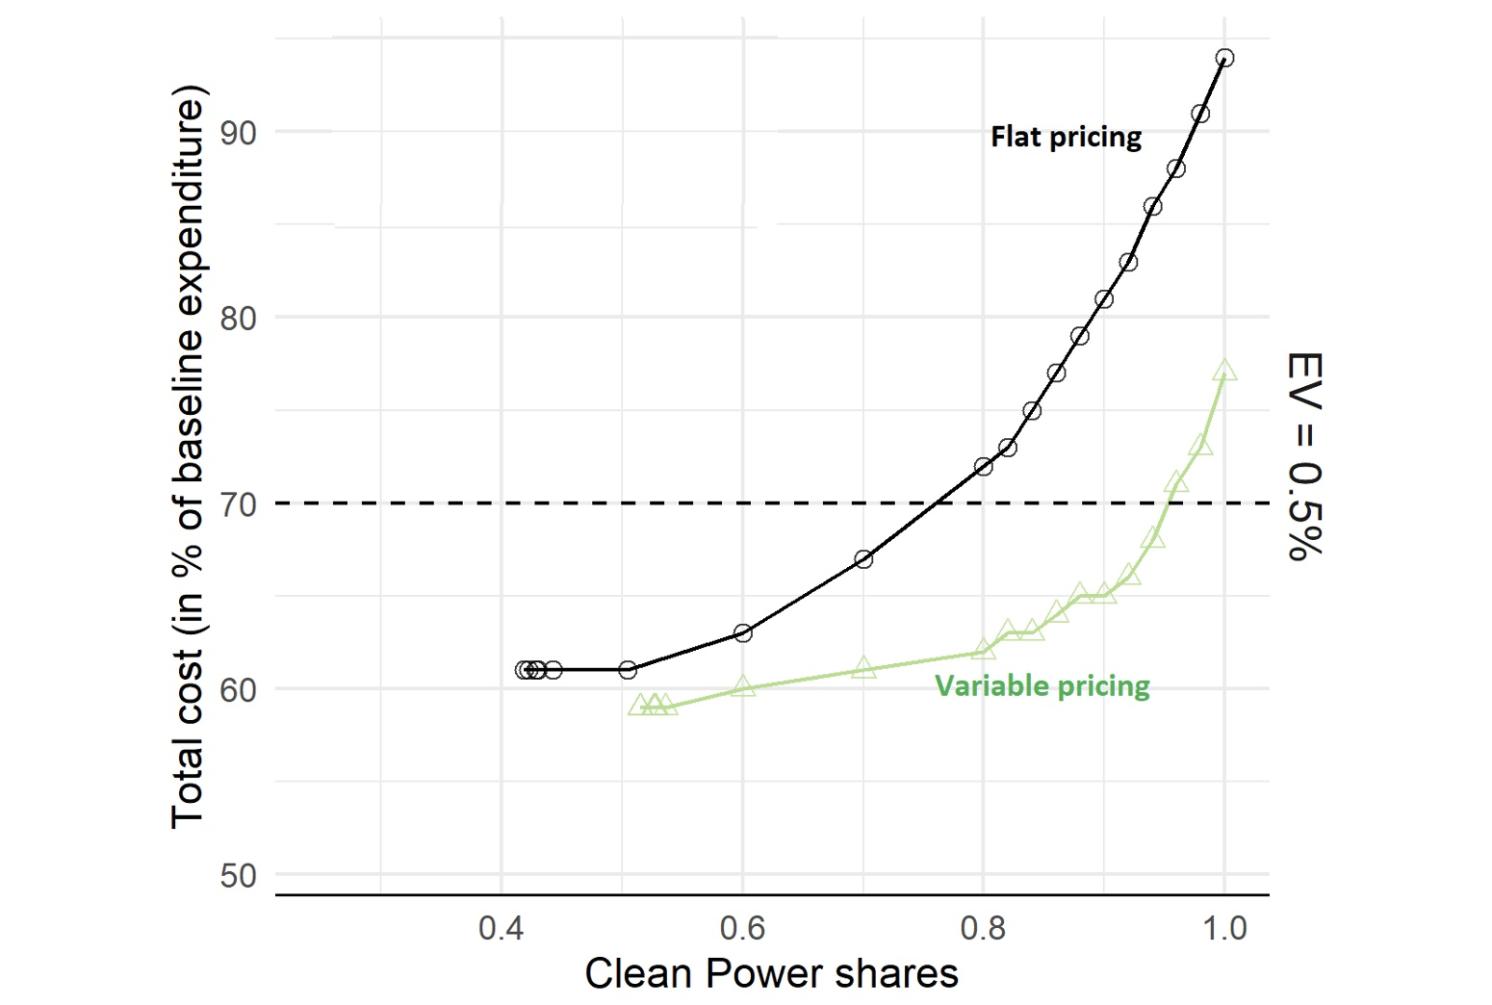 Figure 1 Social cost of clean power with flat pricing vs. variable pricing